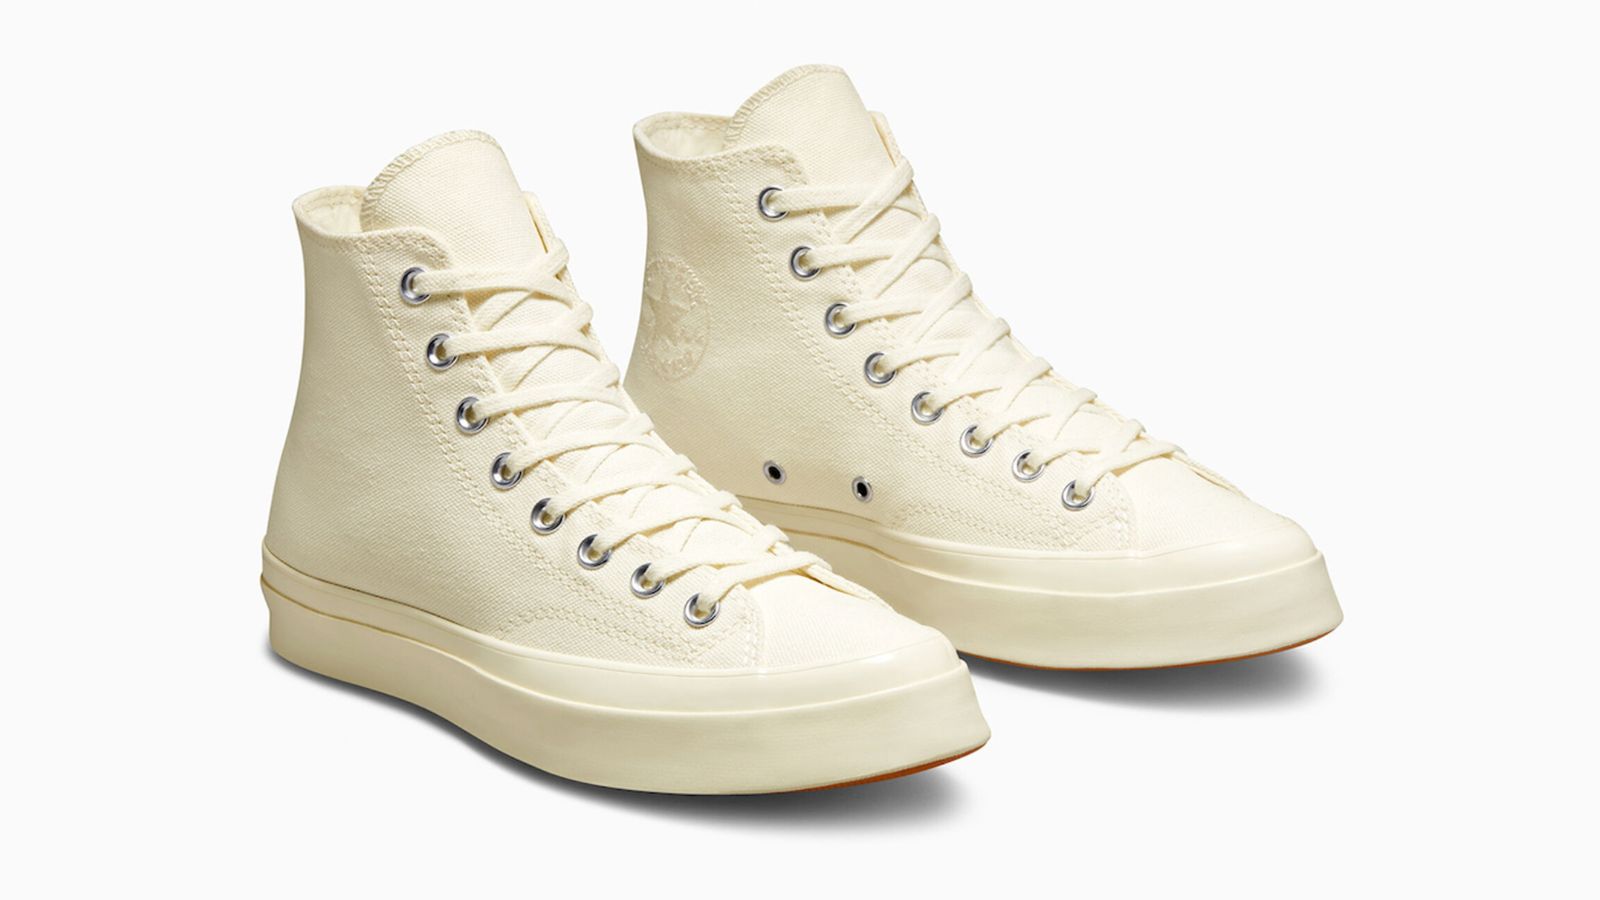 Devin Booker x Converse Chuck 70 Hi "The Next Icon" product image of an all-egret-coloured pair of high-tops.